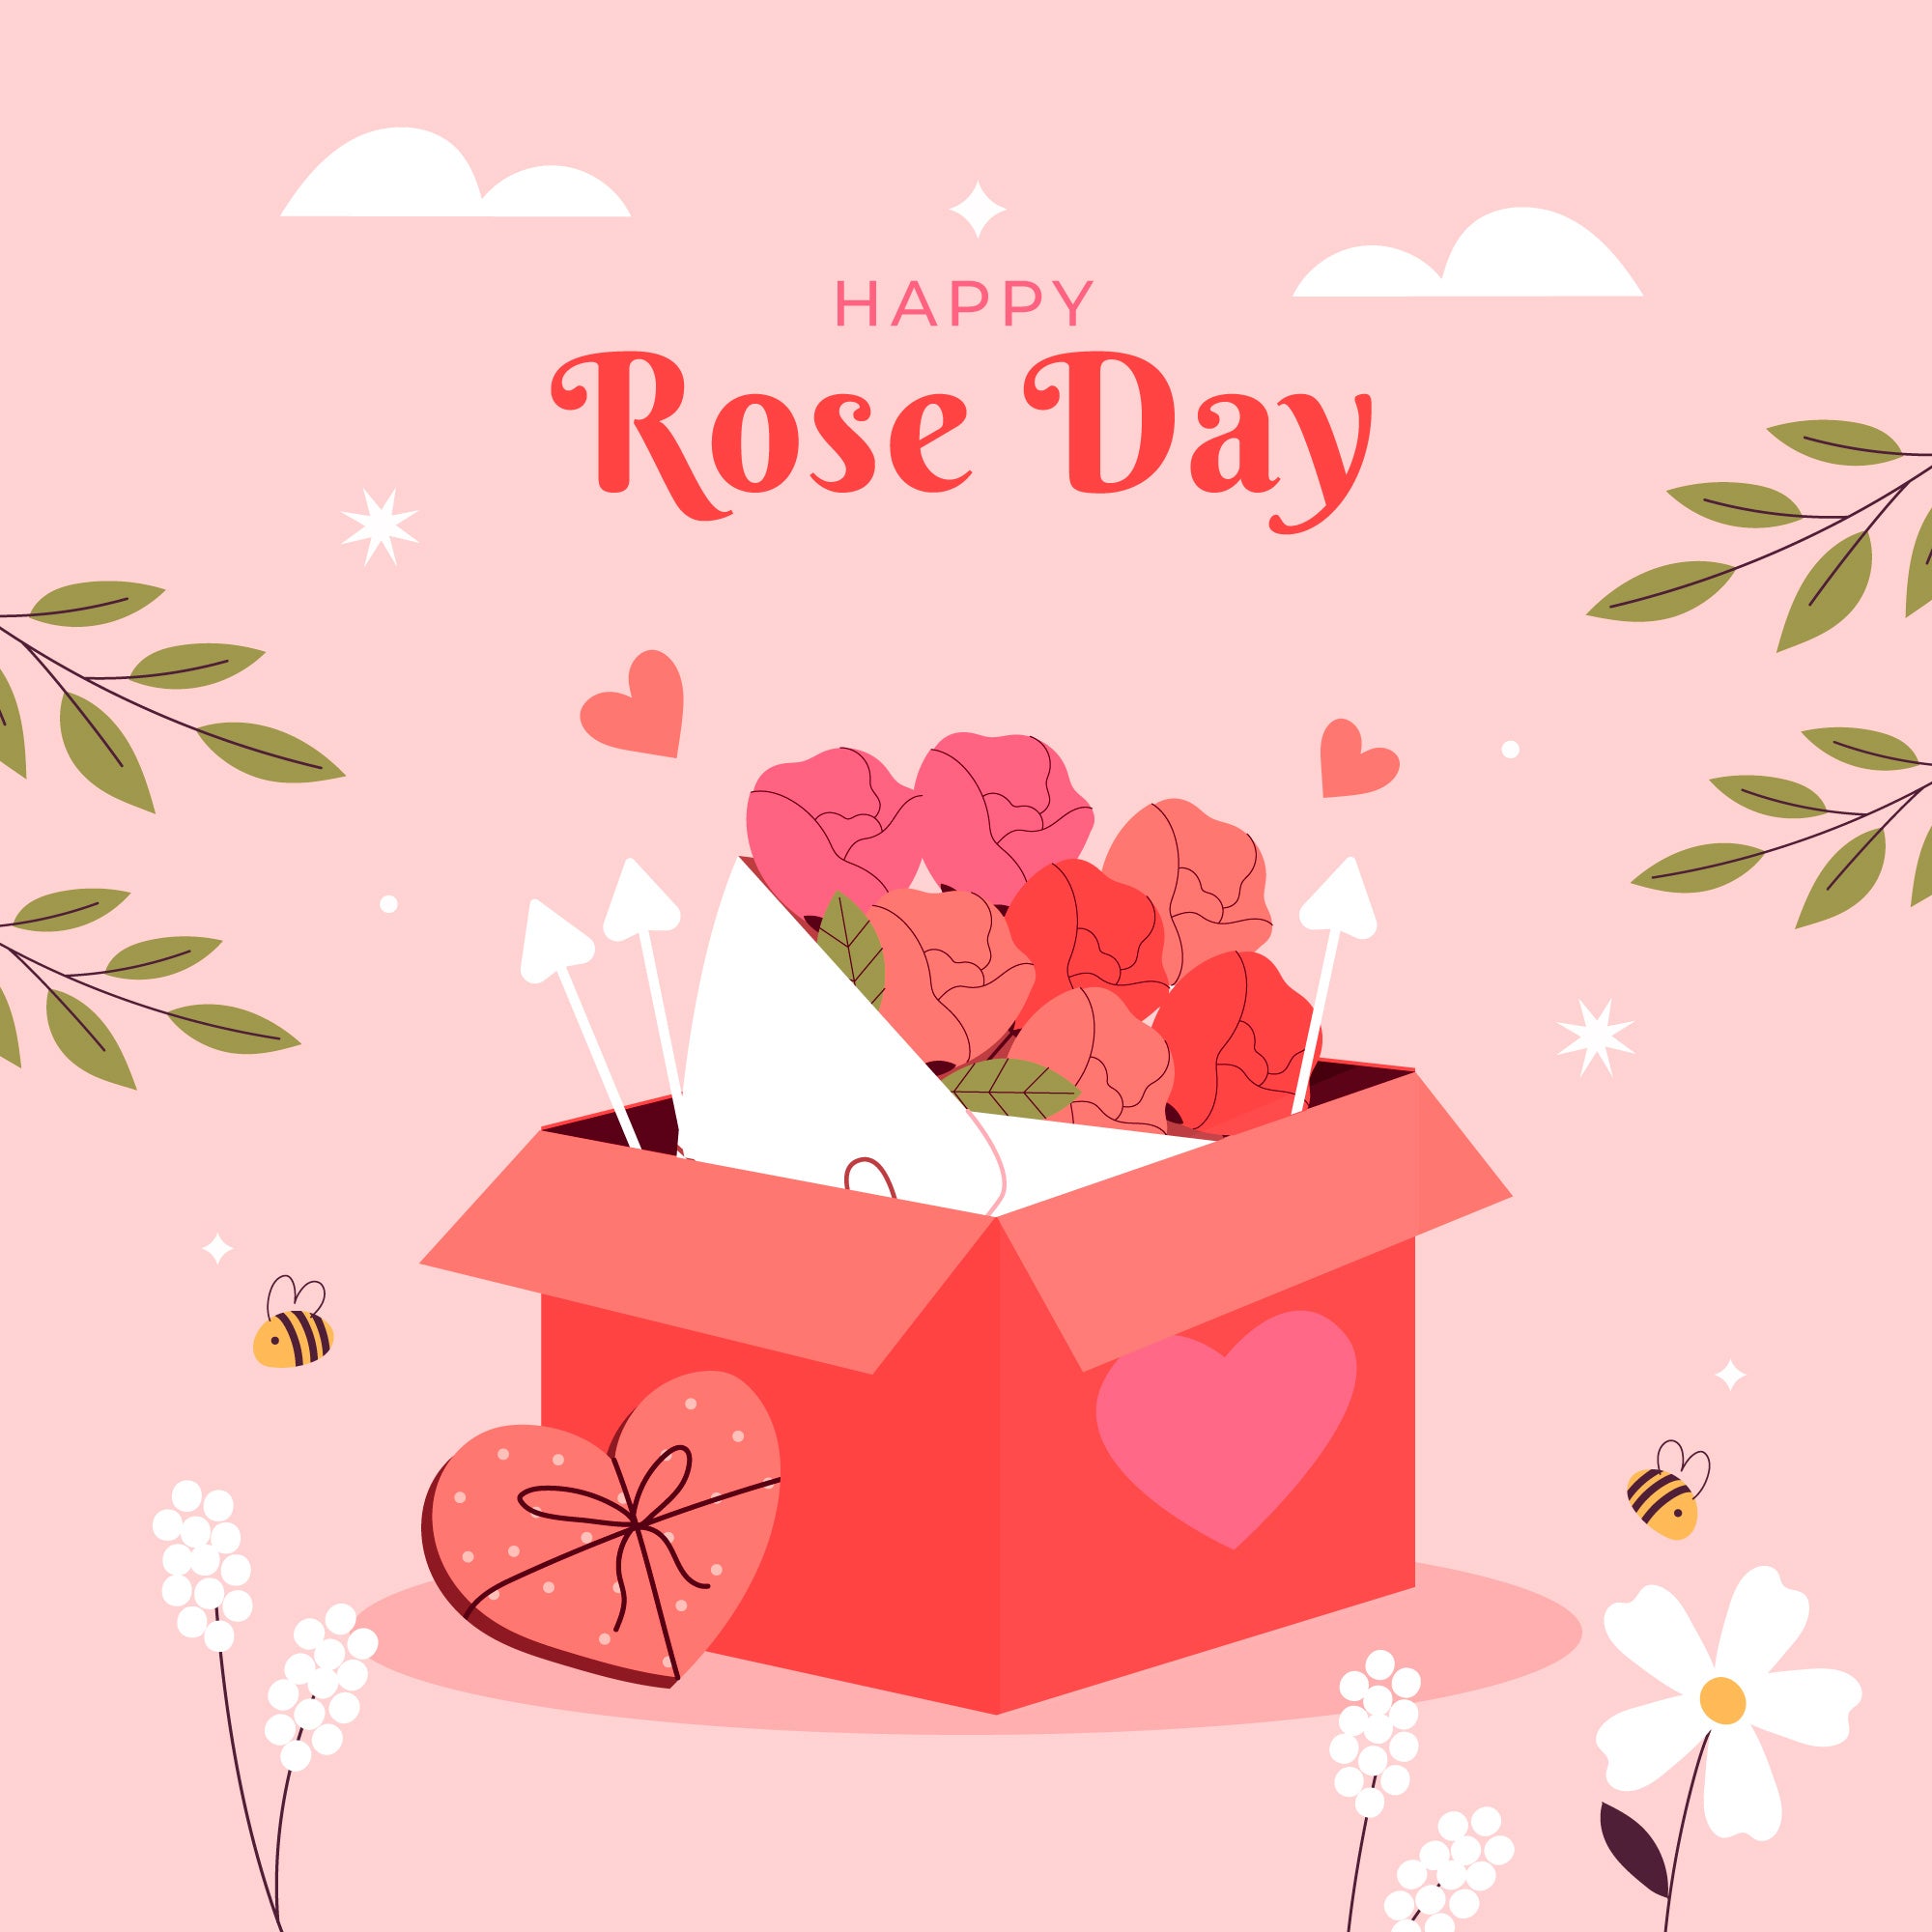 Happy Rose Day 2020: Quotes, HD Images, Wallpapers, Greetings, WhatsApp  messages and Facebook status – India TV